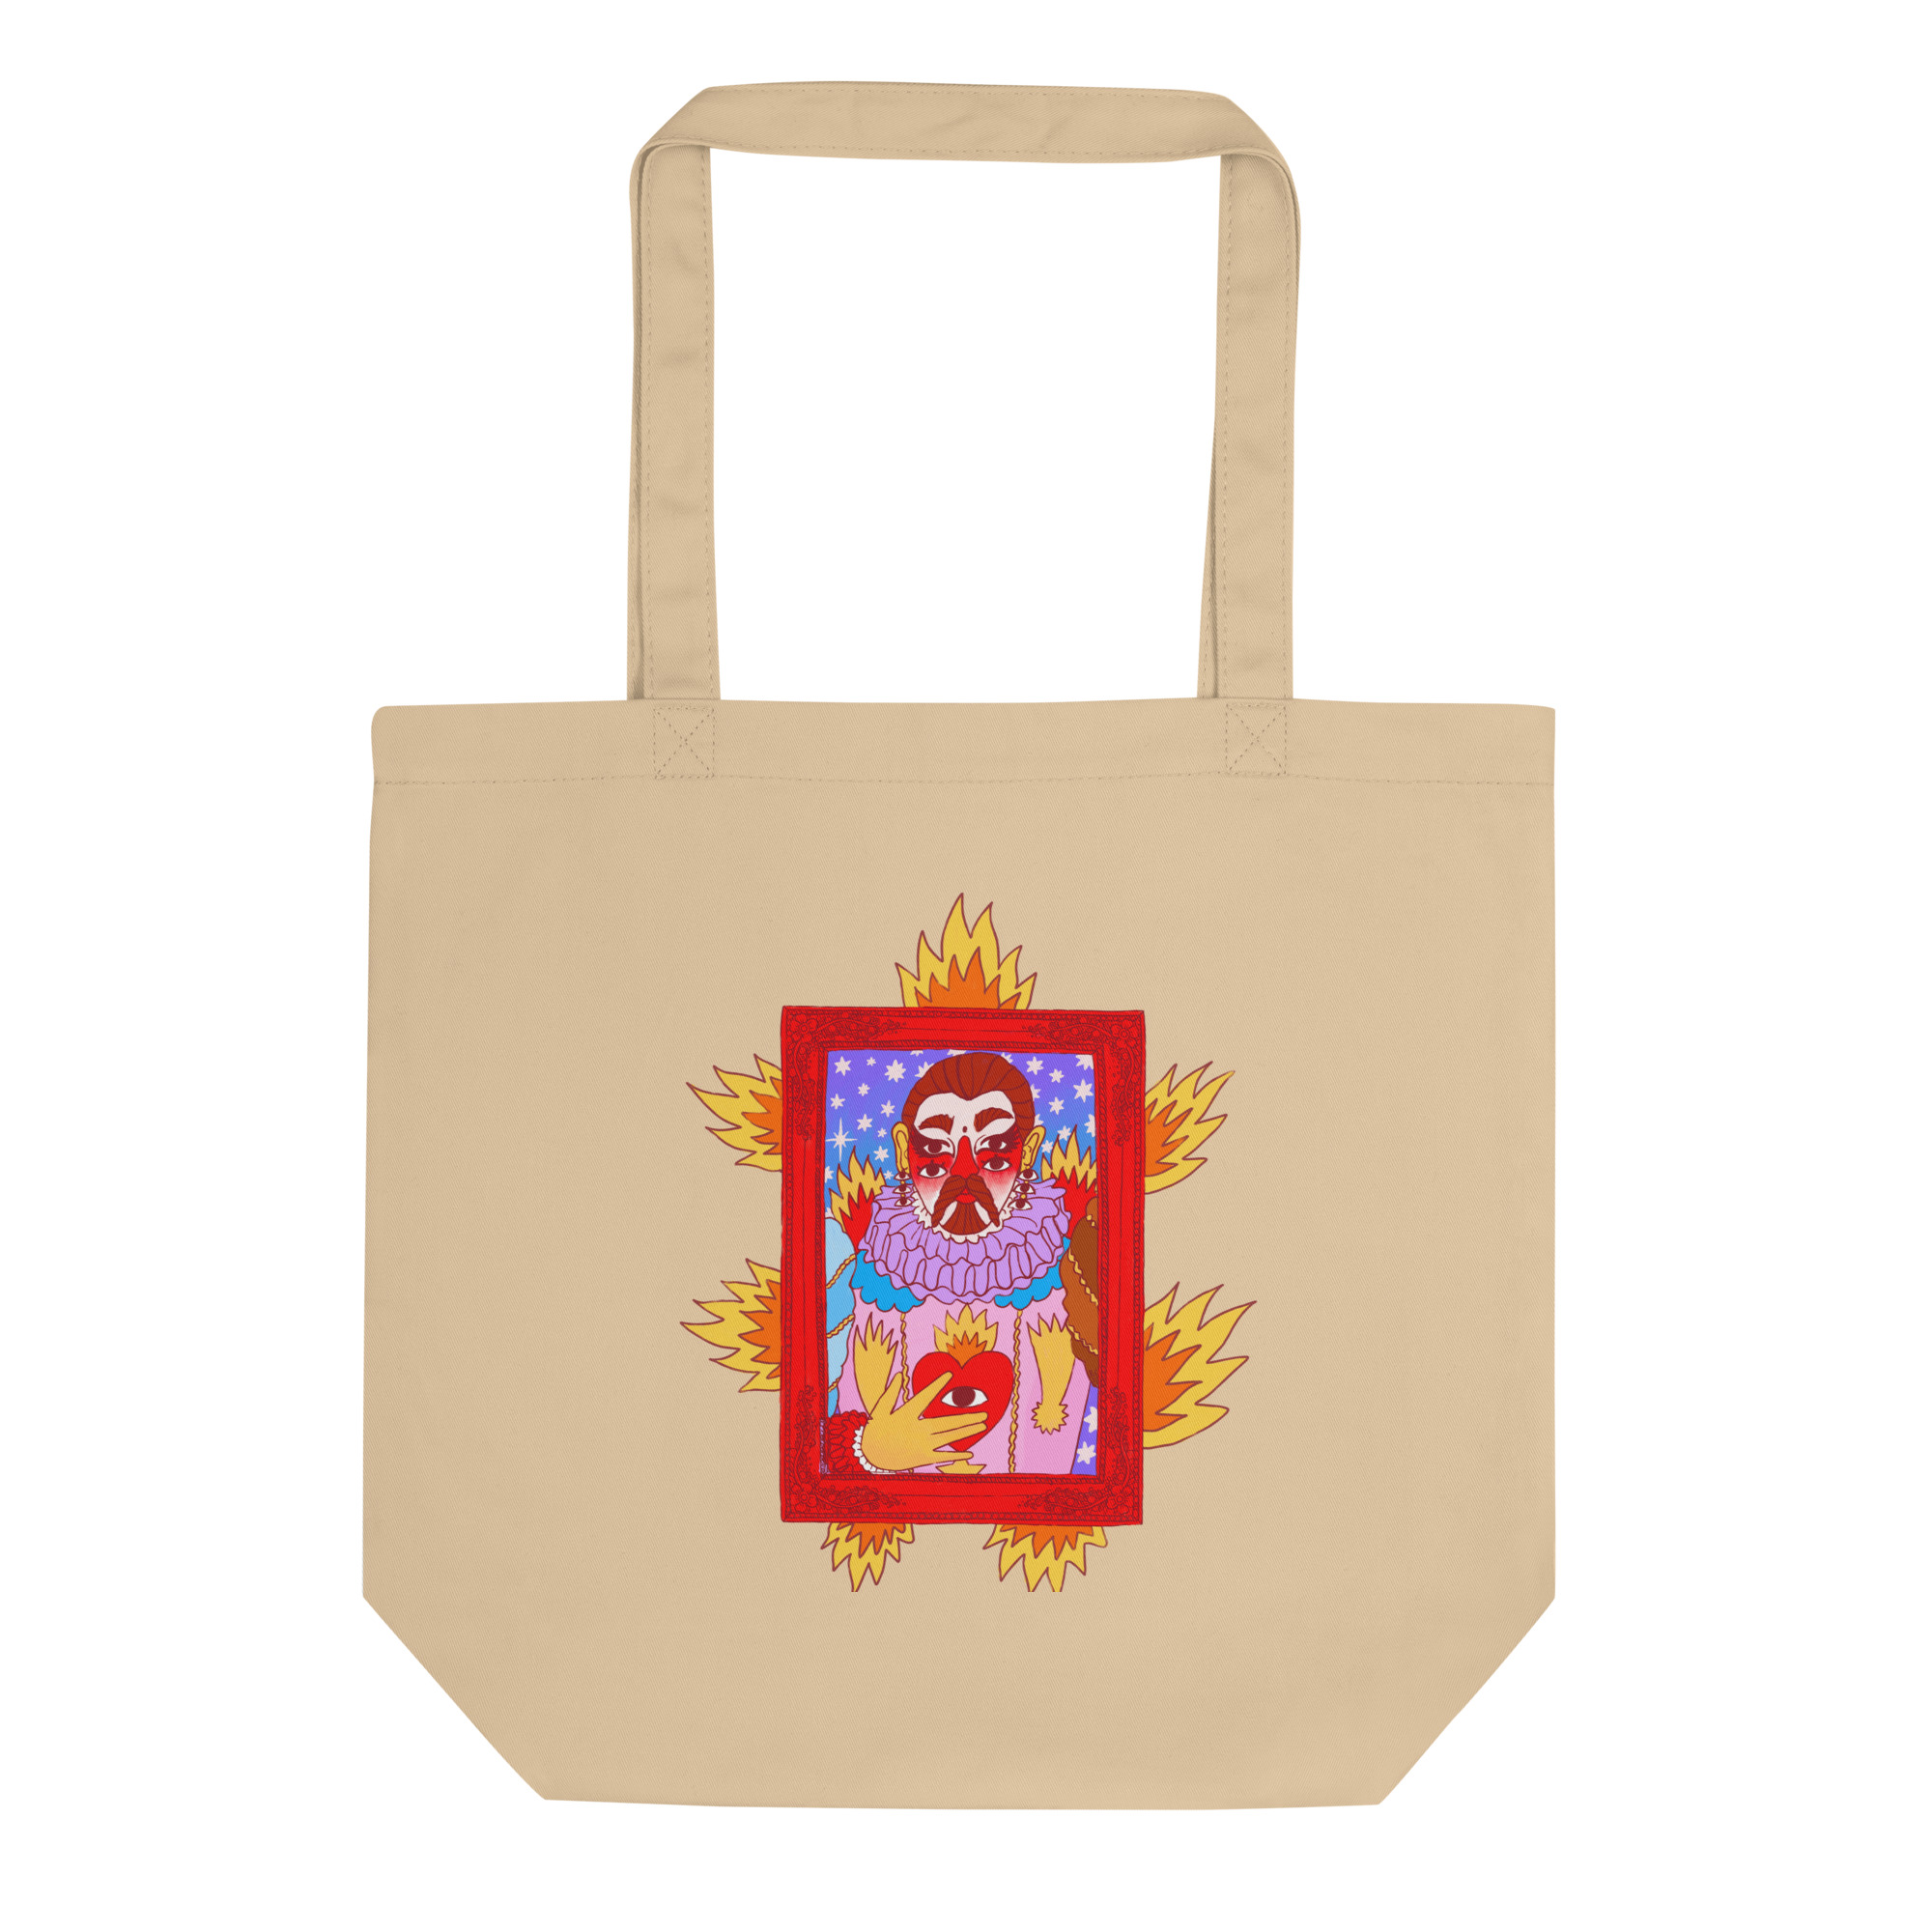 eco-tote-bag-oyster-front-62437dd293463